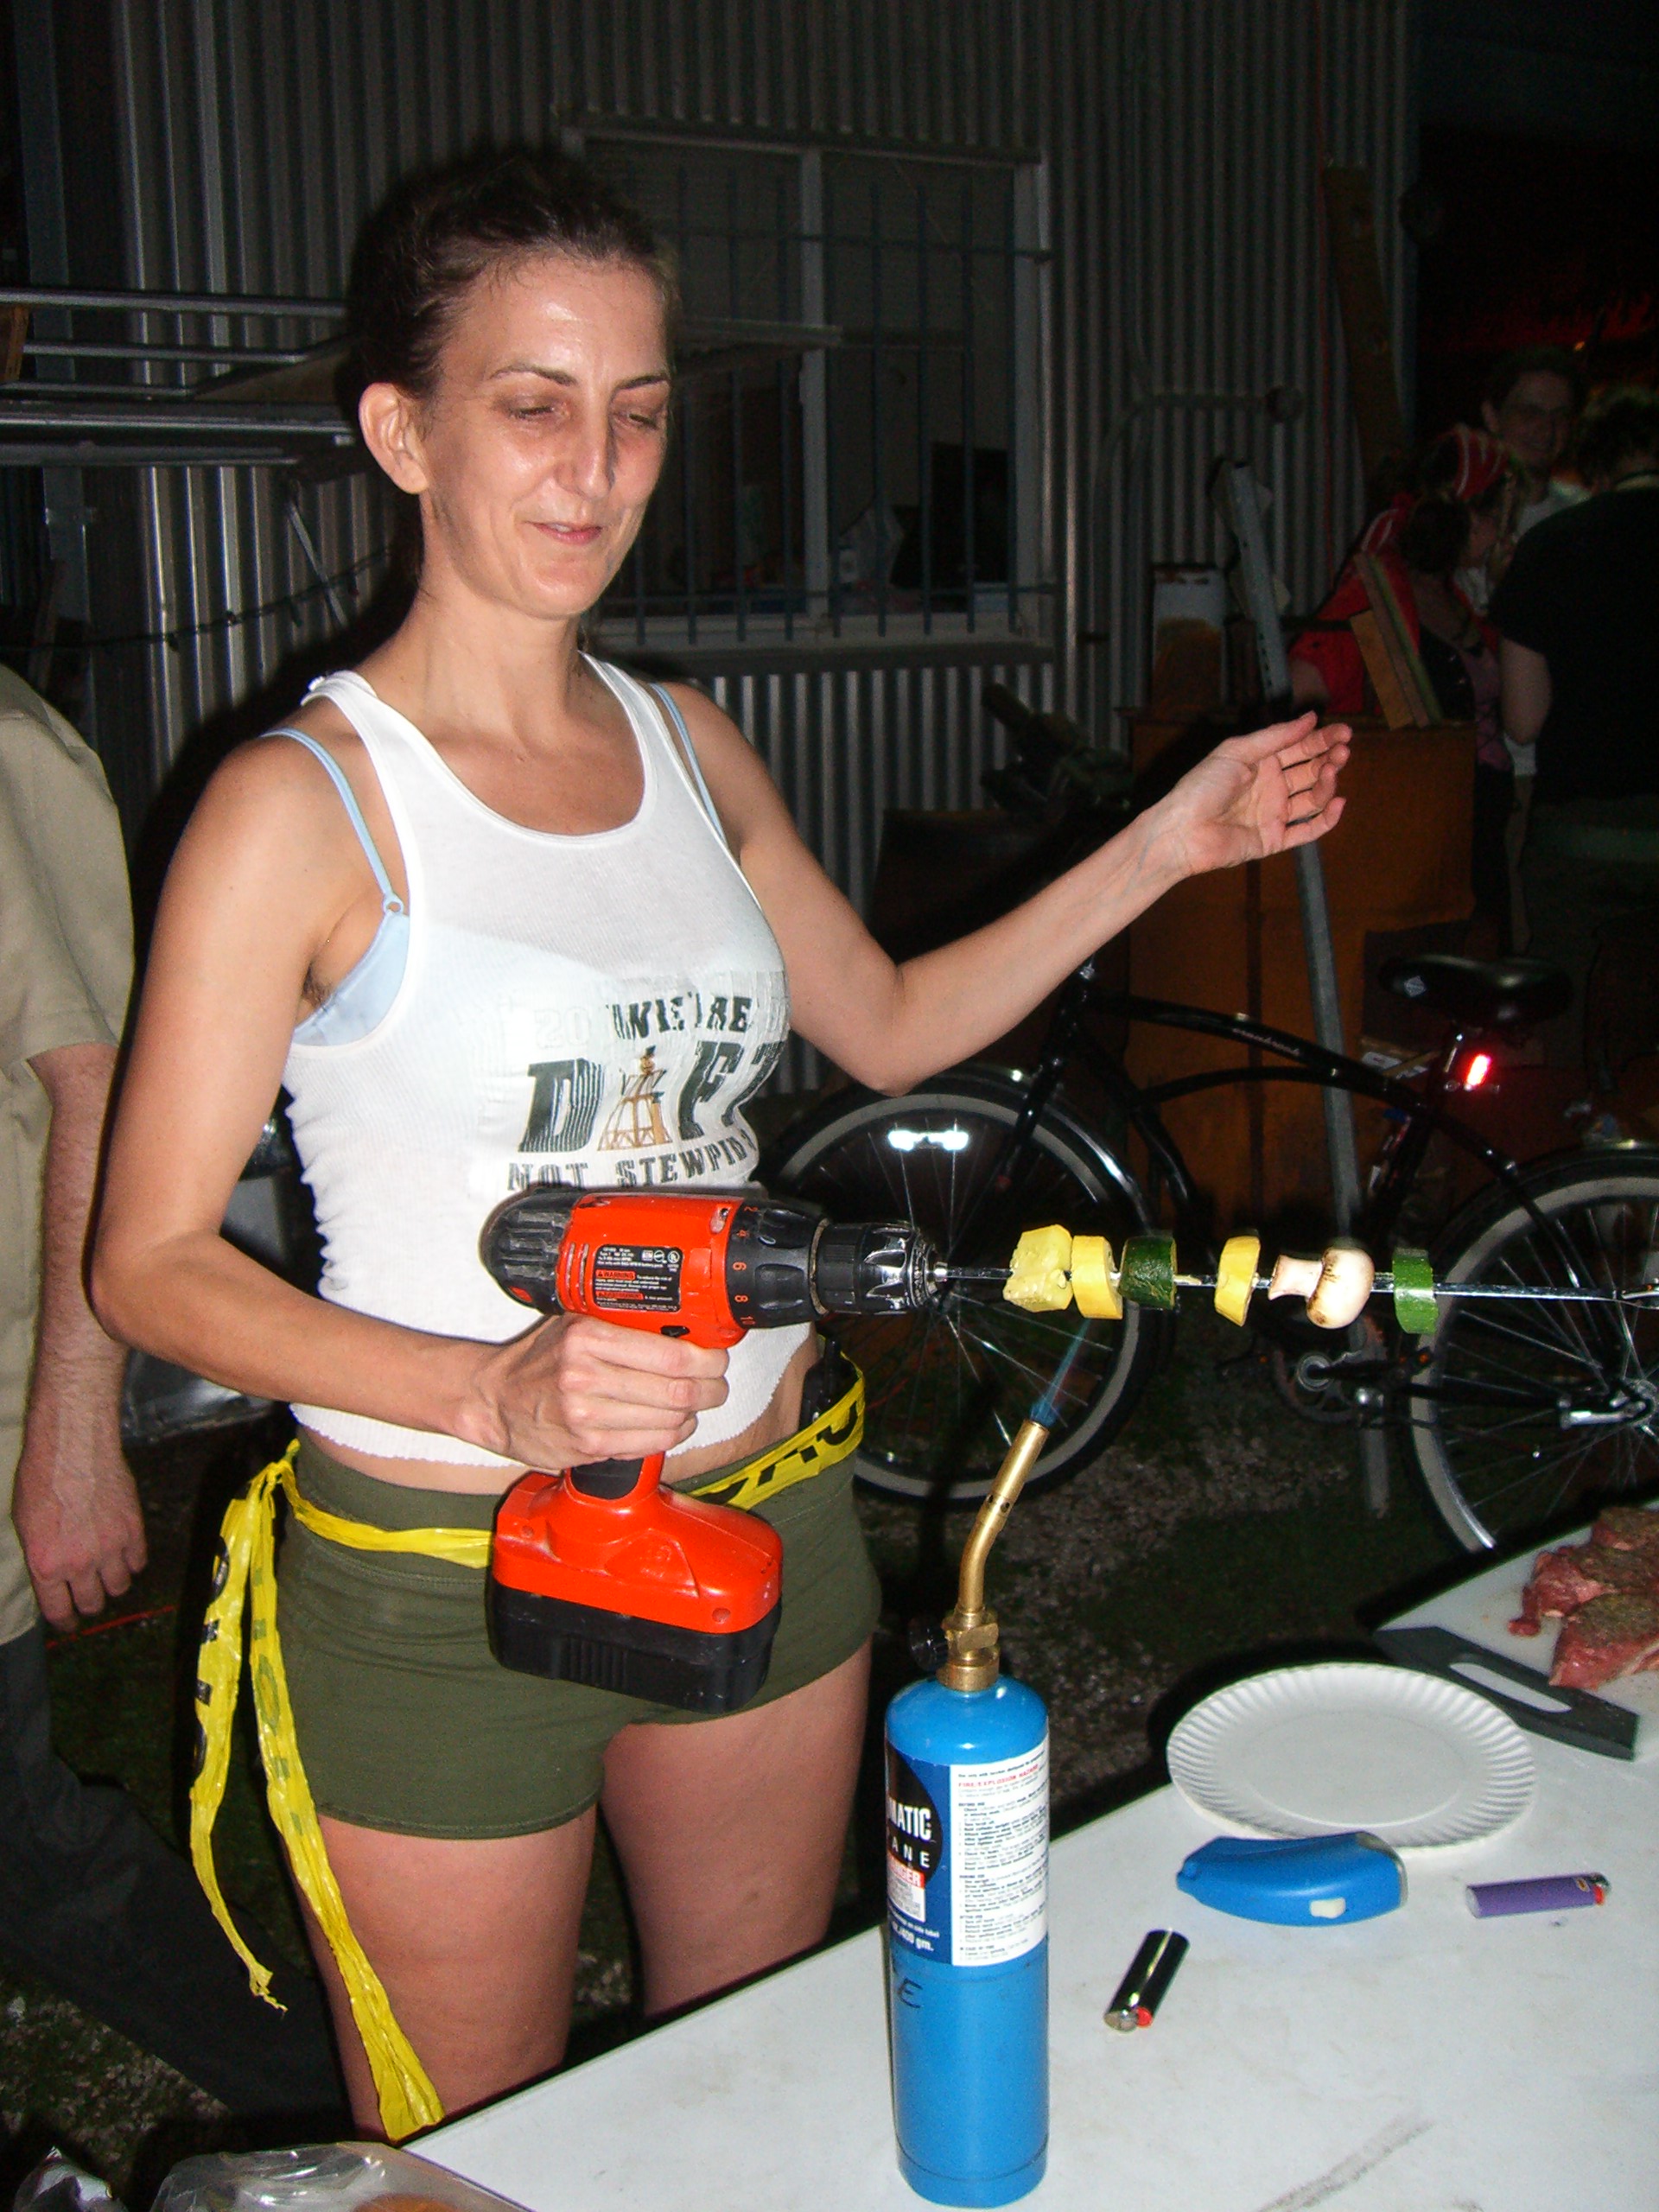 Kebabs roasting on a power drill, May 2007